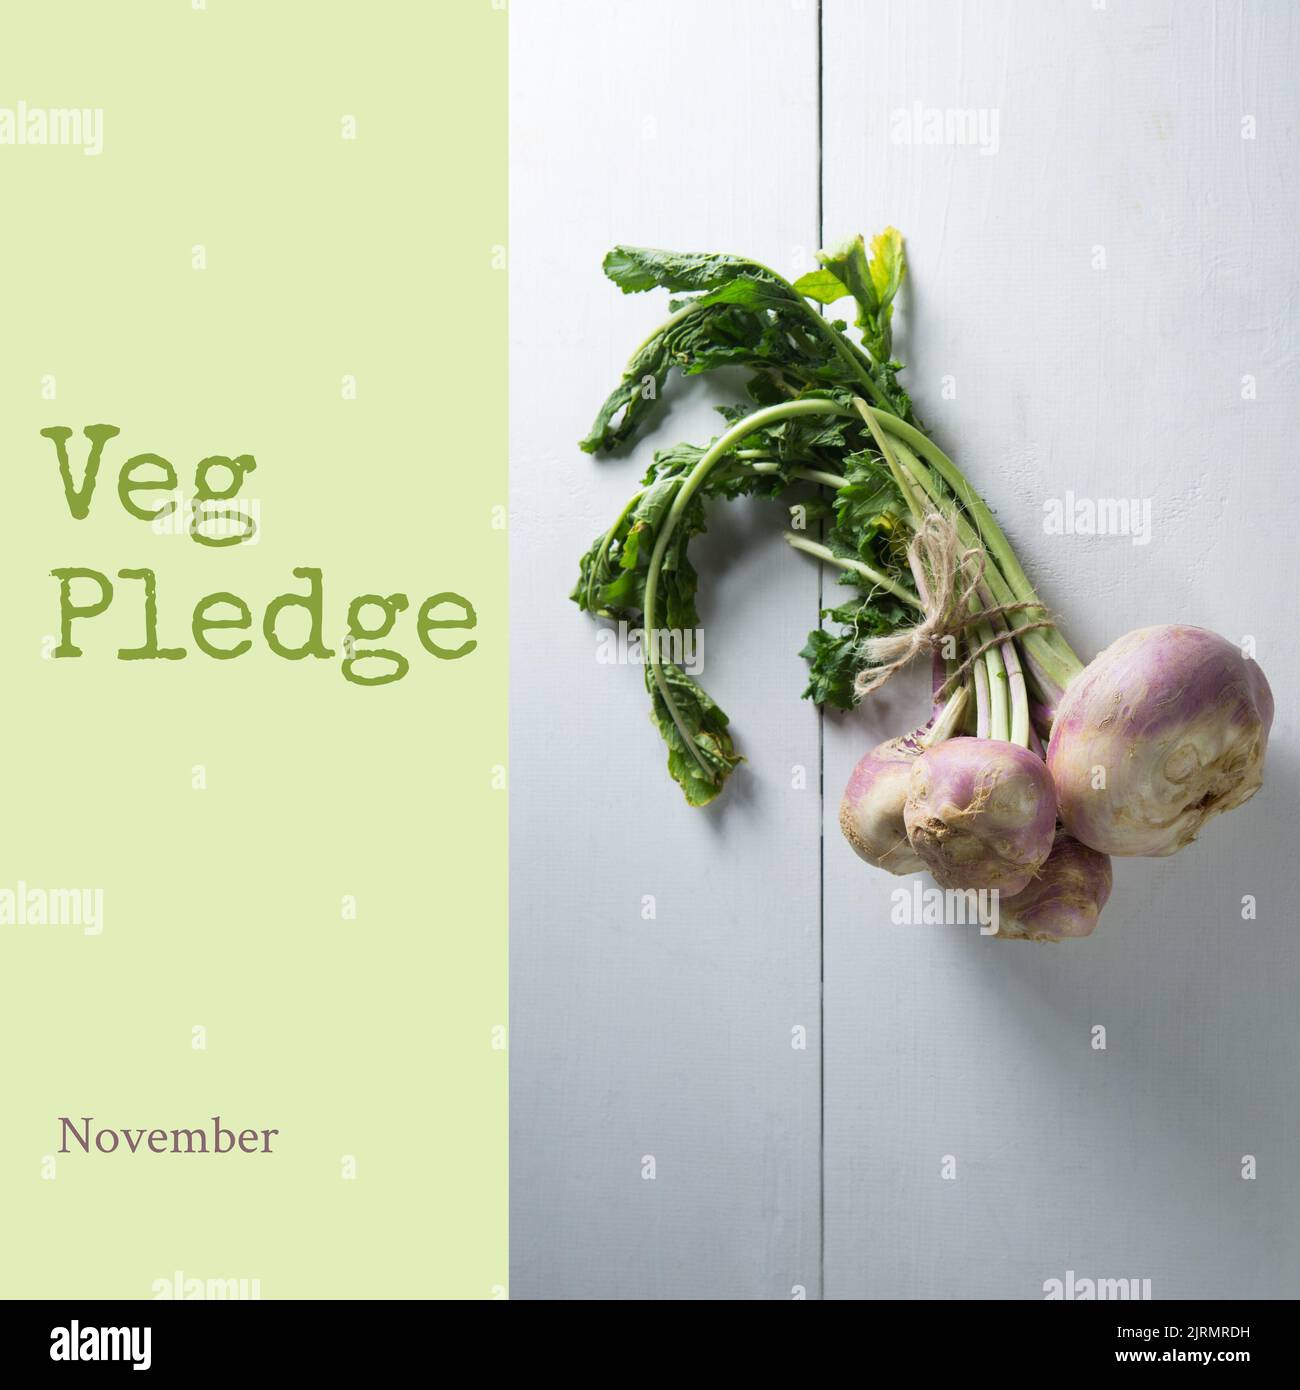 Digital composite image of fresh root vegetable on table with veg pledge text, copy space Stock Photo